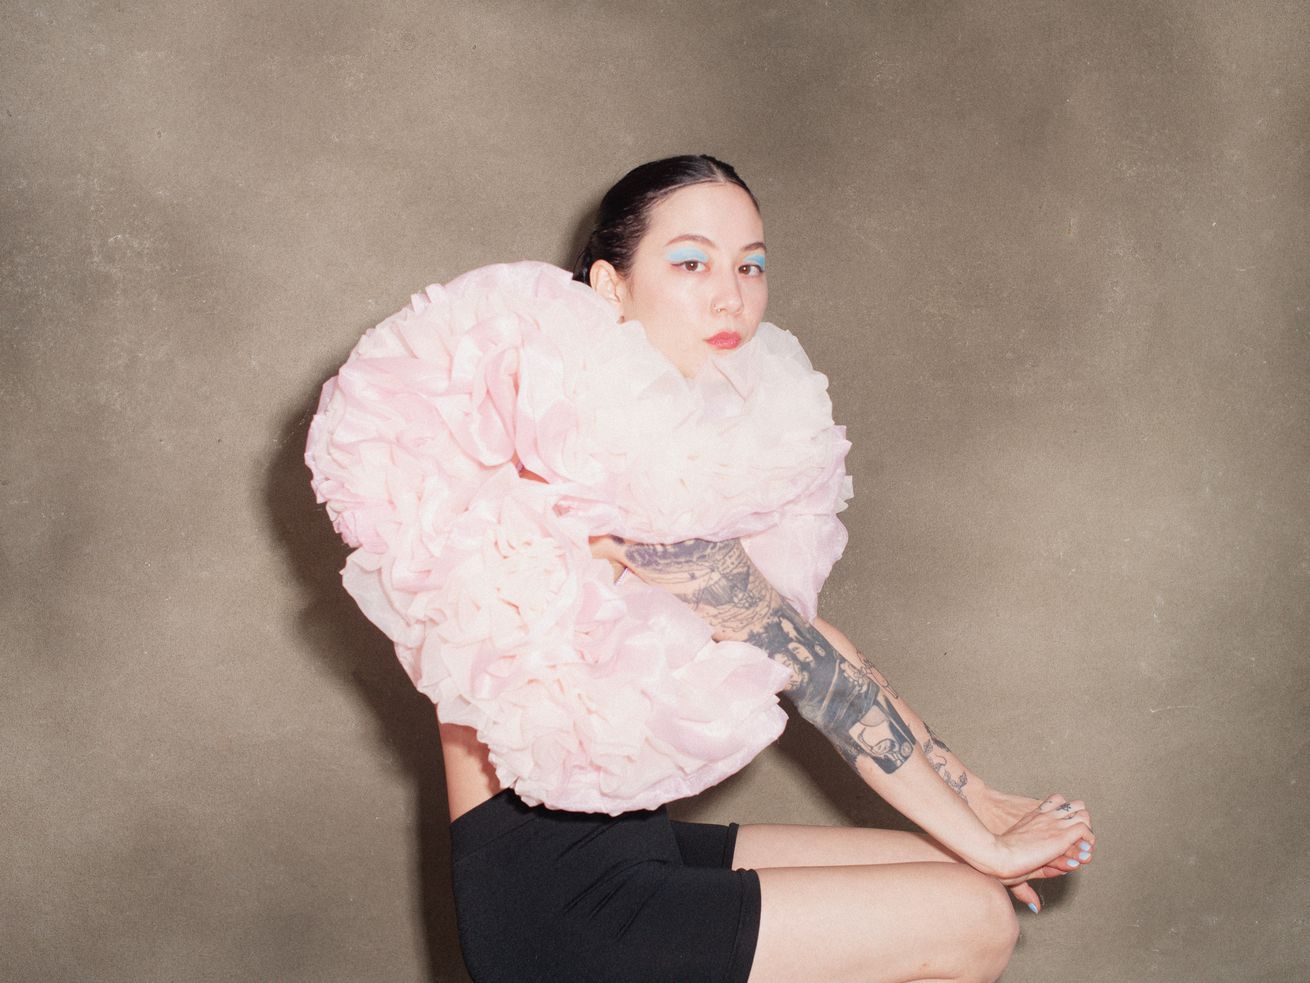 Japanese Breakfast isn’t the artist she used to be